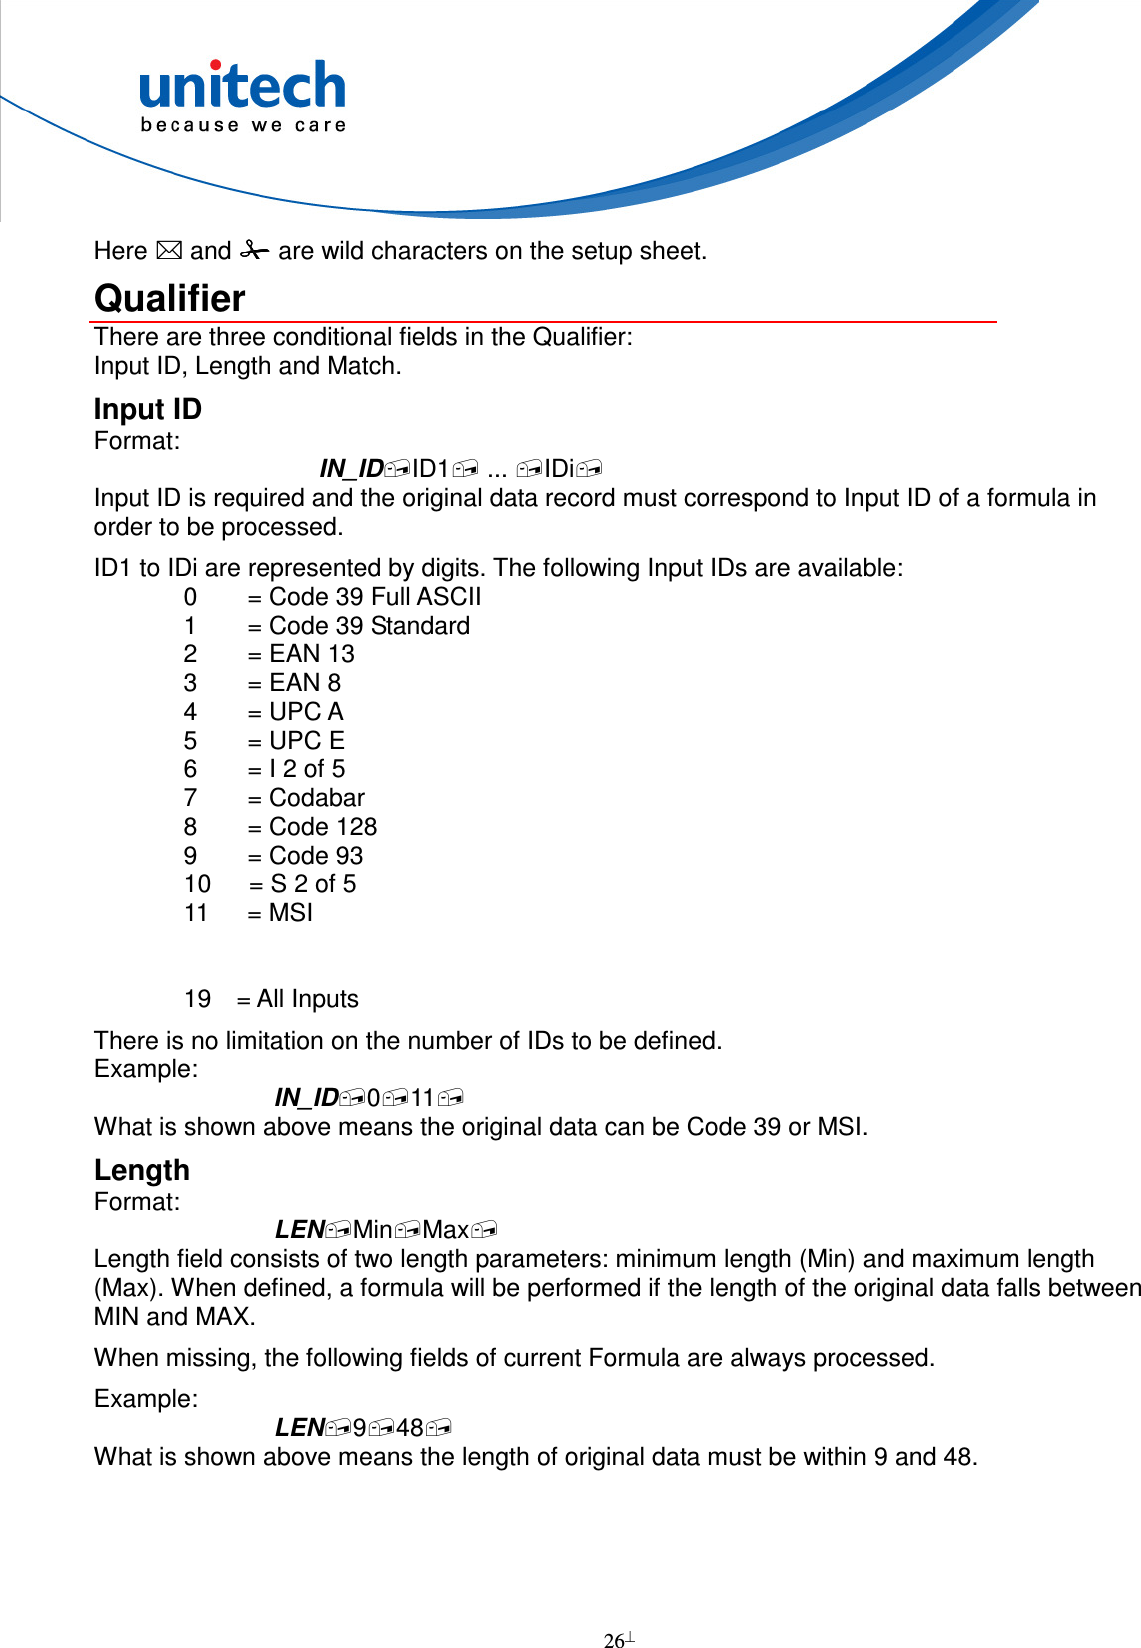  26  Here  and  are wild characters on the setup sheet. Qualifier There are three conditional fields in the Qualifier: Input ID, Length and Match. Input ID Format: IN_IDID1 ... IDi Input ID is required and the original data record must correspond to Input ID of a formula in order to be processed. ID1 to IDi are represented by digits. The following Input IDs are available: 0        = Code 39 Full ASCII 1        = Code 39 Standard 2        = EAN 13 3        = EAN 8 4        = UPC A 5        = UPC E 6        = I 2 of 5 7        = Codabar 8        = Code 128 9        = Code 93 10      = S 2 of 5 11      = MSI   19    = All Inputs There is no limitation on the number of IDs to be defined. Example: IN_ID011 What is shown above means the original data can be Code 39 or MSI. Length Format: LENMinMax Length field consists of two length parameters: minimum length (Min) and maximum length (Max). When defined, a formula will be performed if the length of the original data falls between MIN and MAX. When missing, the following fields of current Formula are always processed. Example: LEN948 What is shown above means the length of original data must be within 9 and 48.